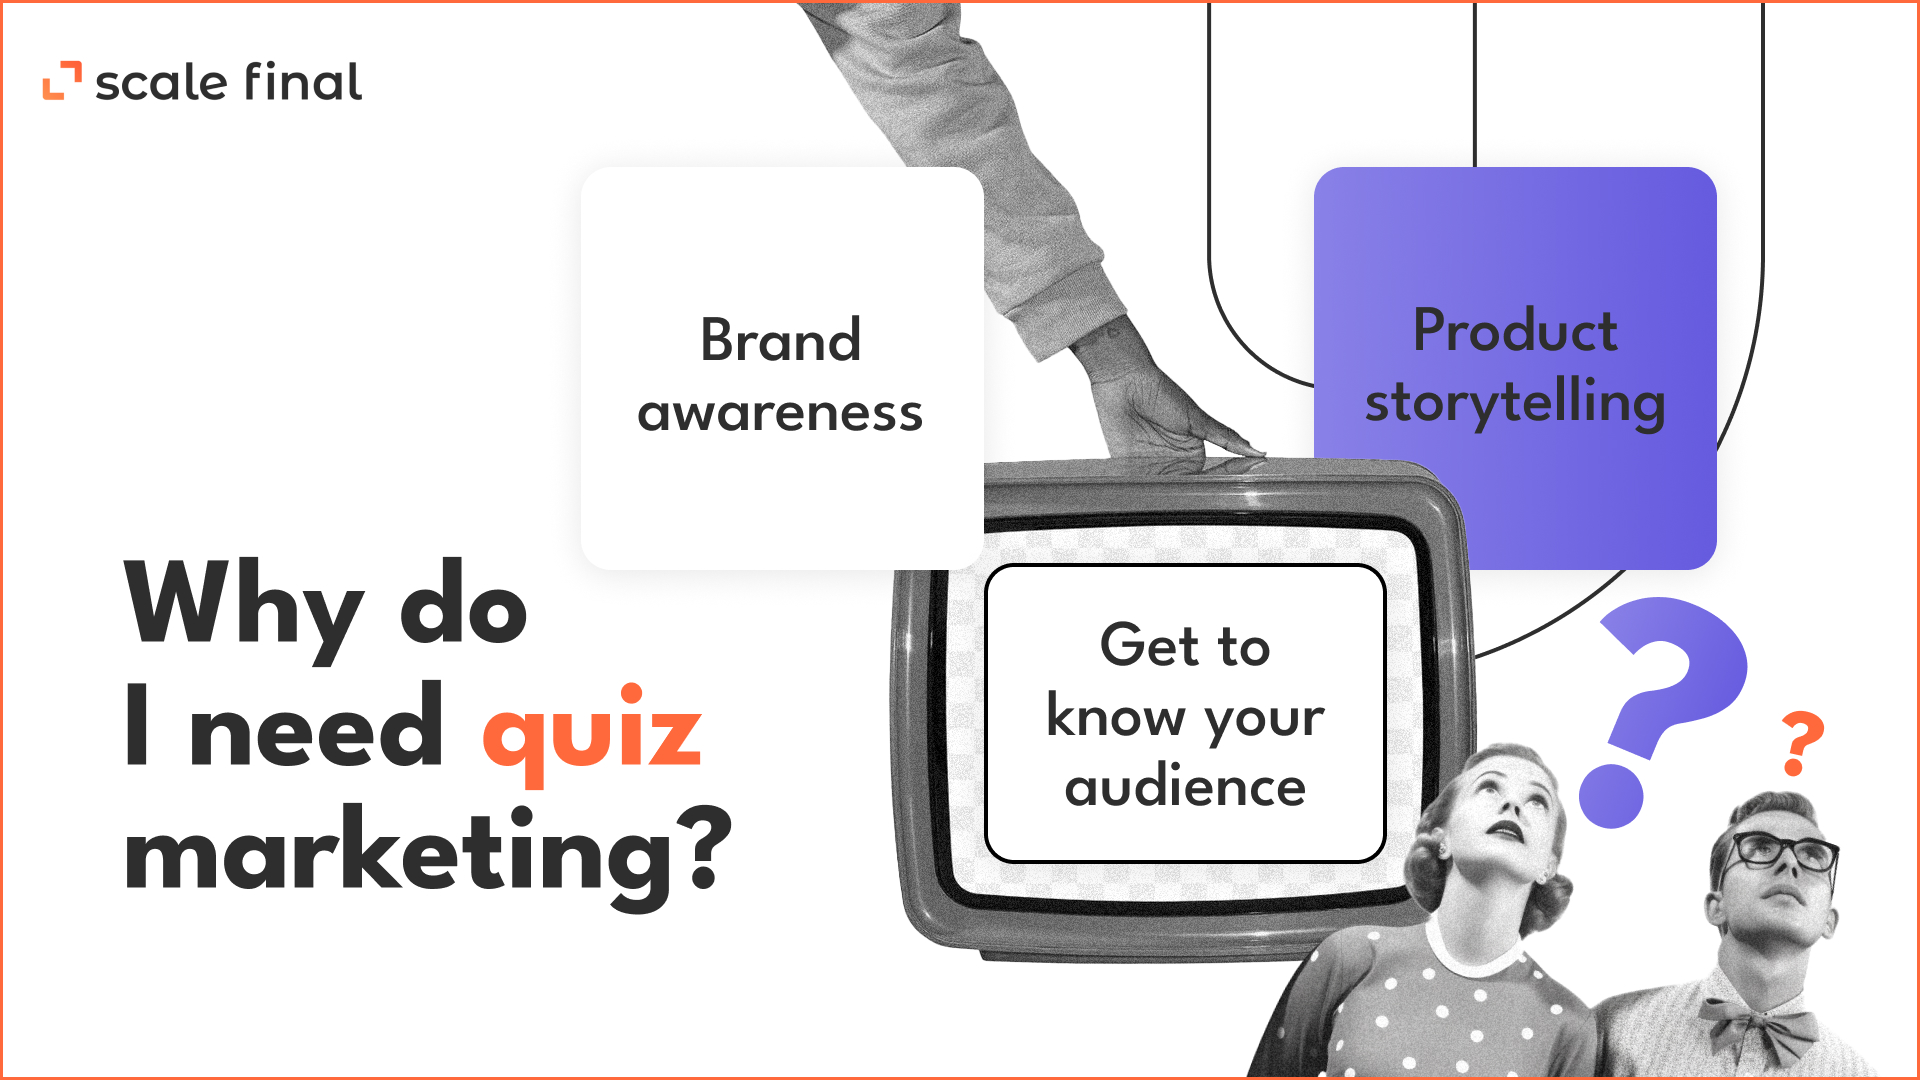 Why do I need quiz marketing?Brand awareness.Get to know your audience. Product storytelling. 